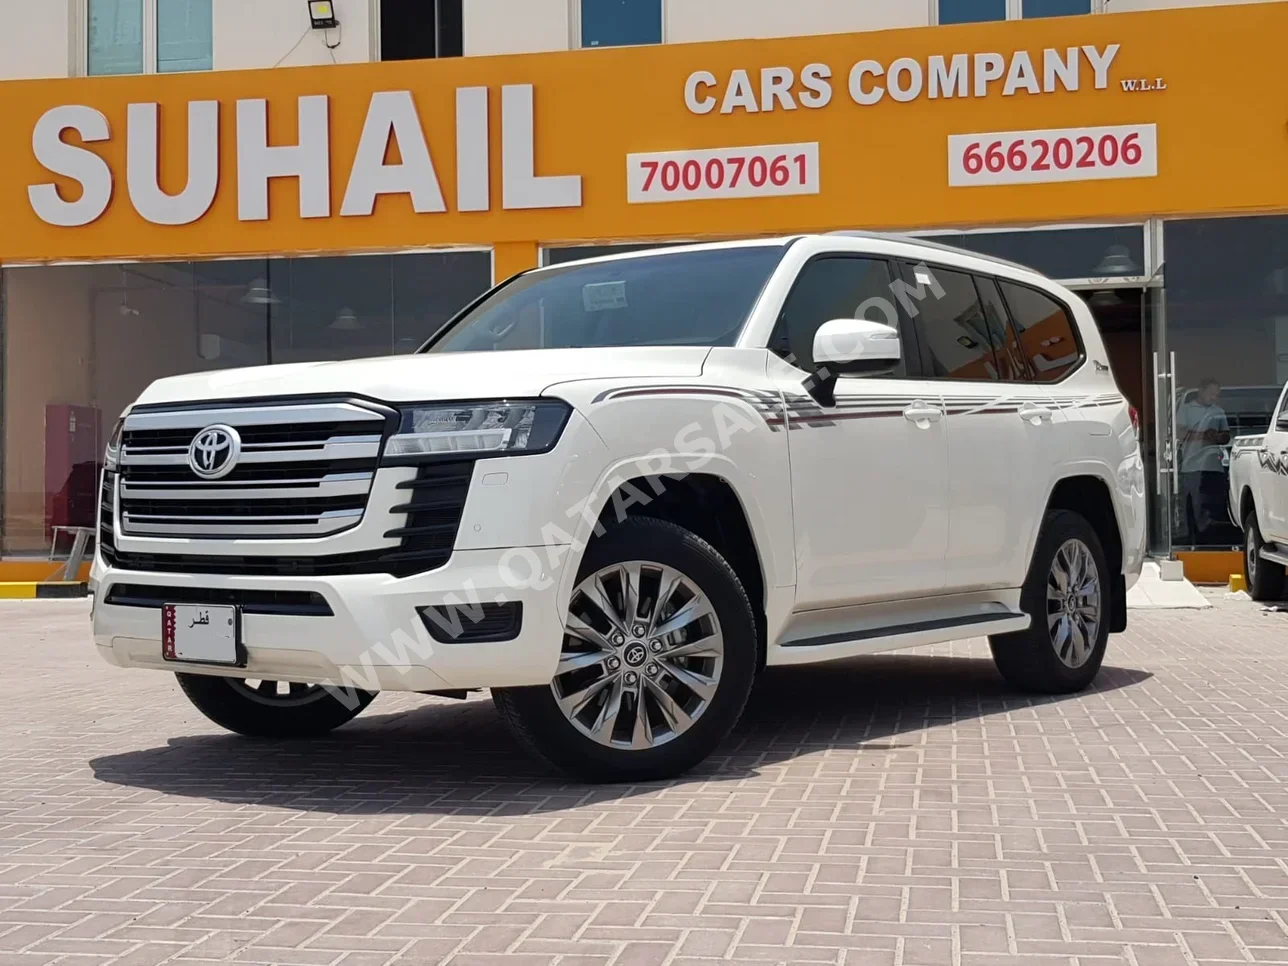 Toyota  Land Cruiser  GXR Twin Turbo  2022  Automatic  103,000 Km  6 Cylinder  Four Wheel Drive (4WD)  SUV  White